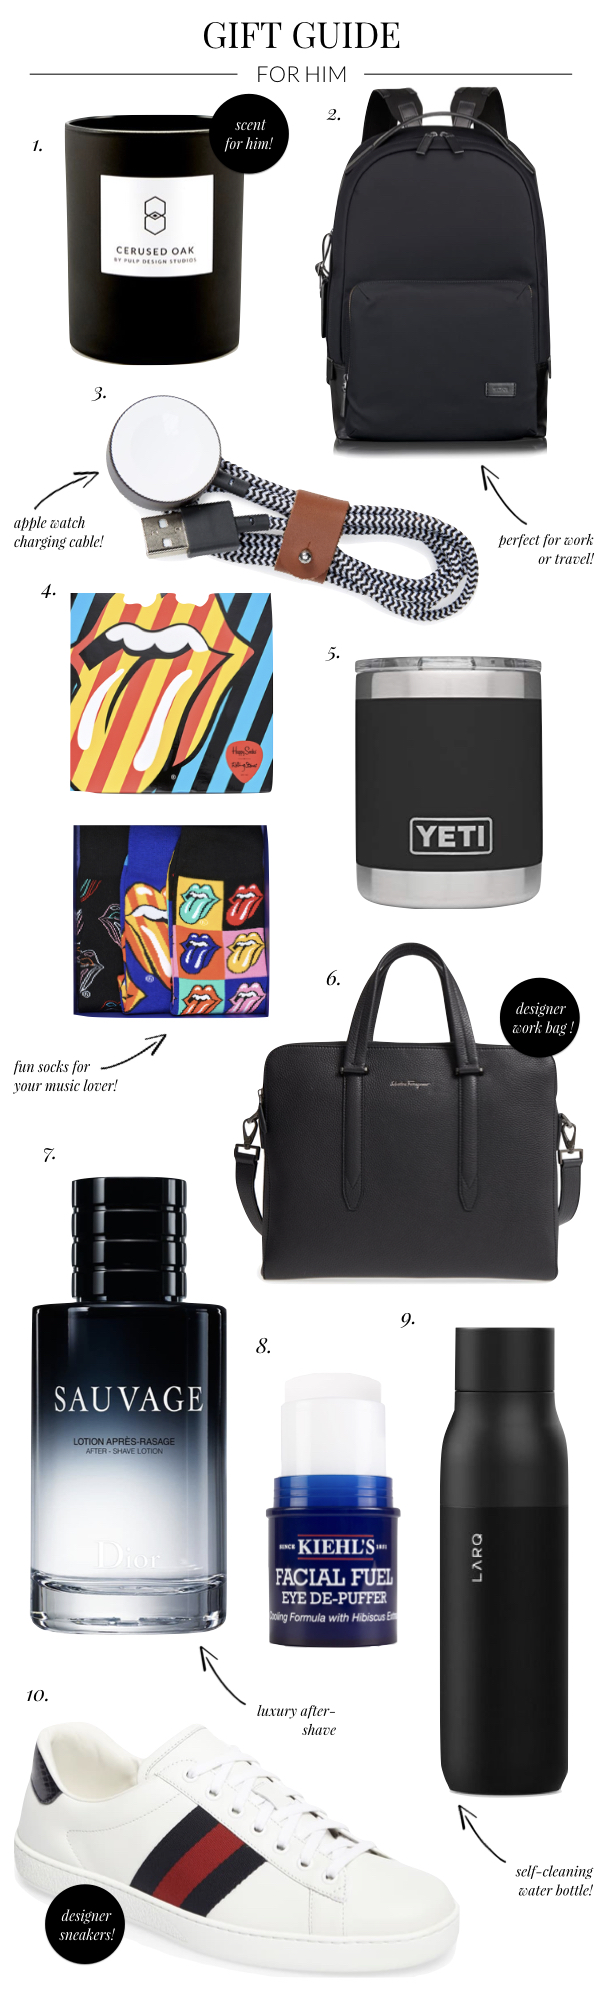 2019 Holiday Gift Guide: For Him | Pulp Design Studios